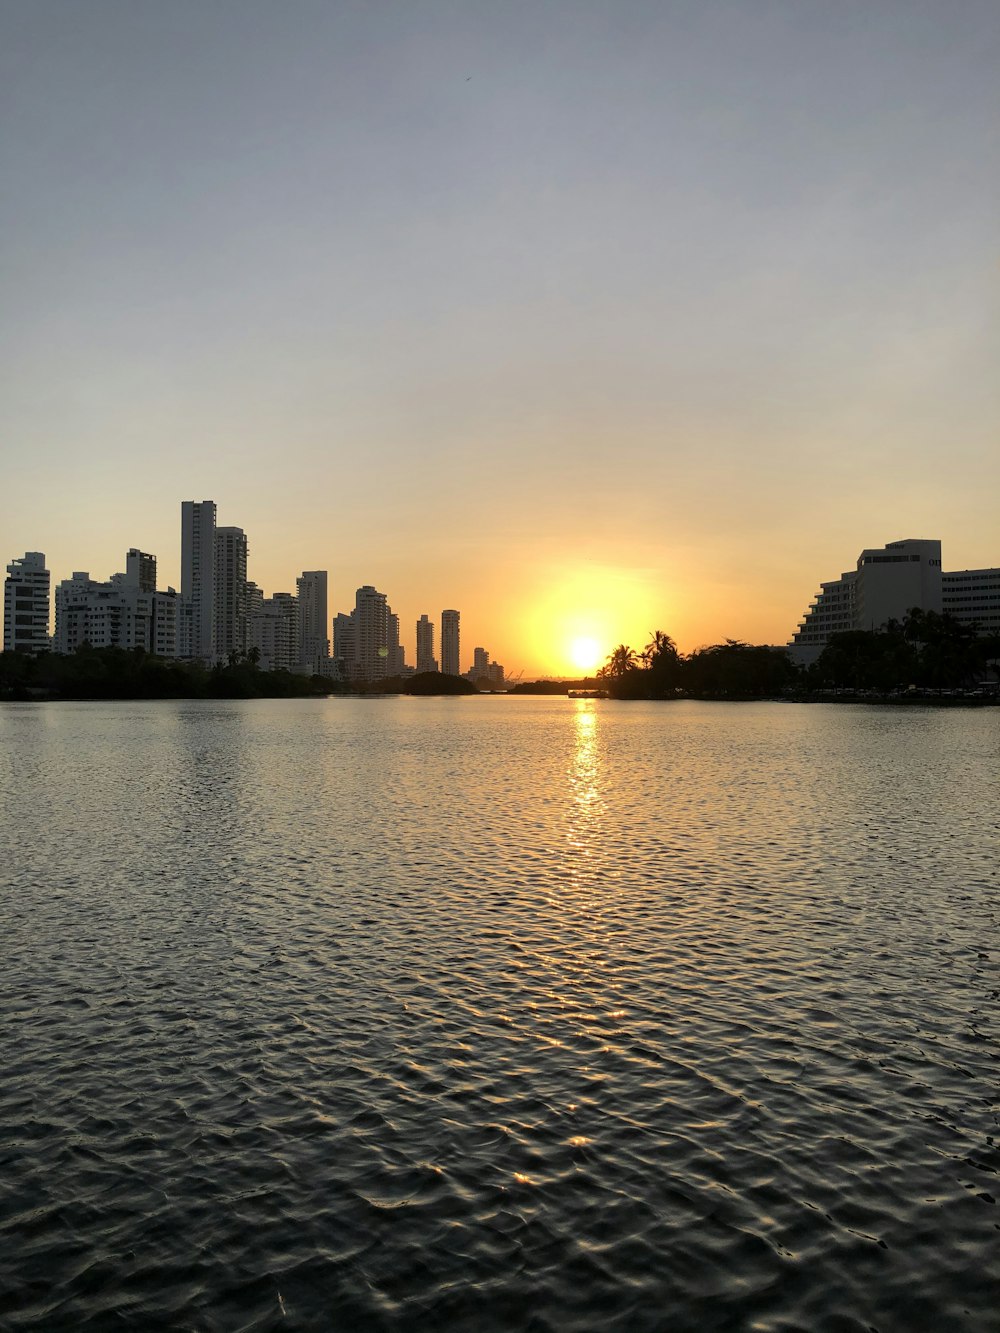 city skyline during sunset with body of water